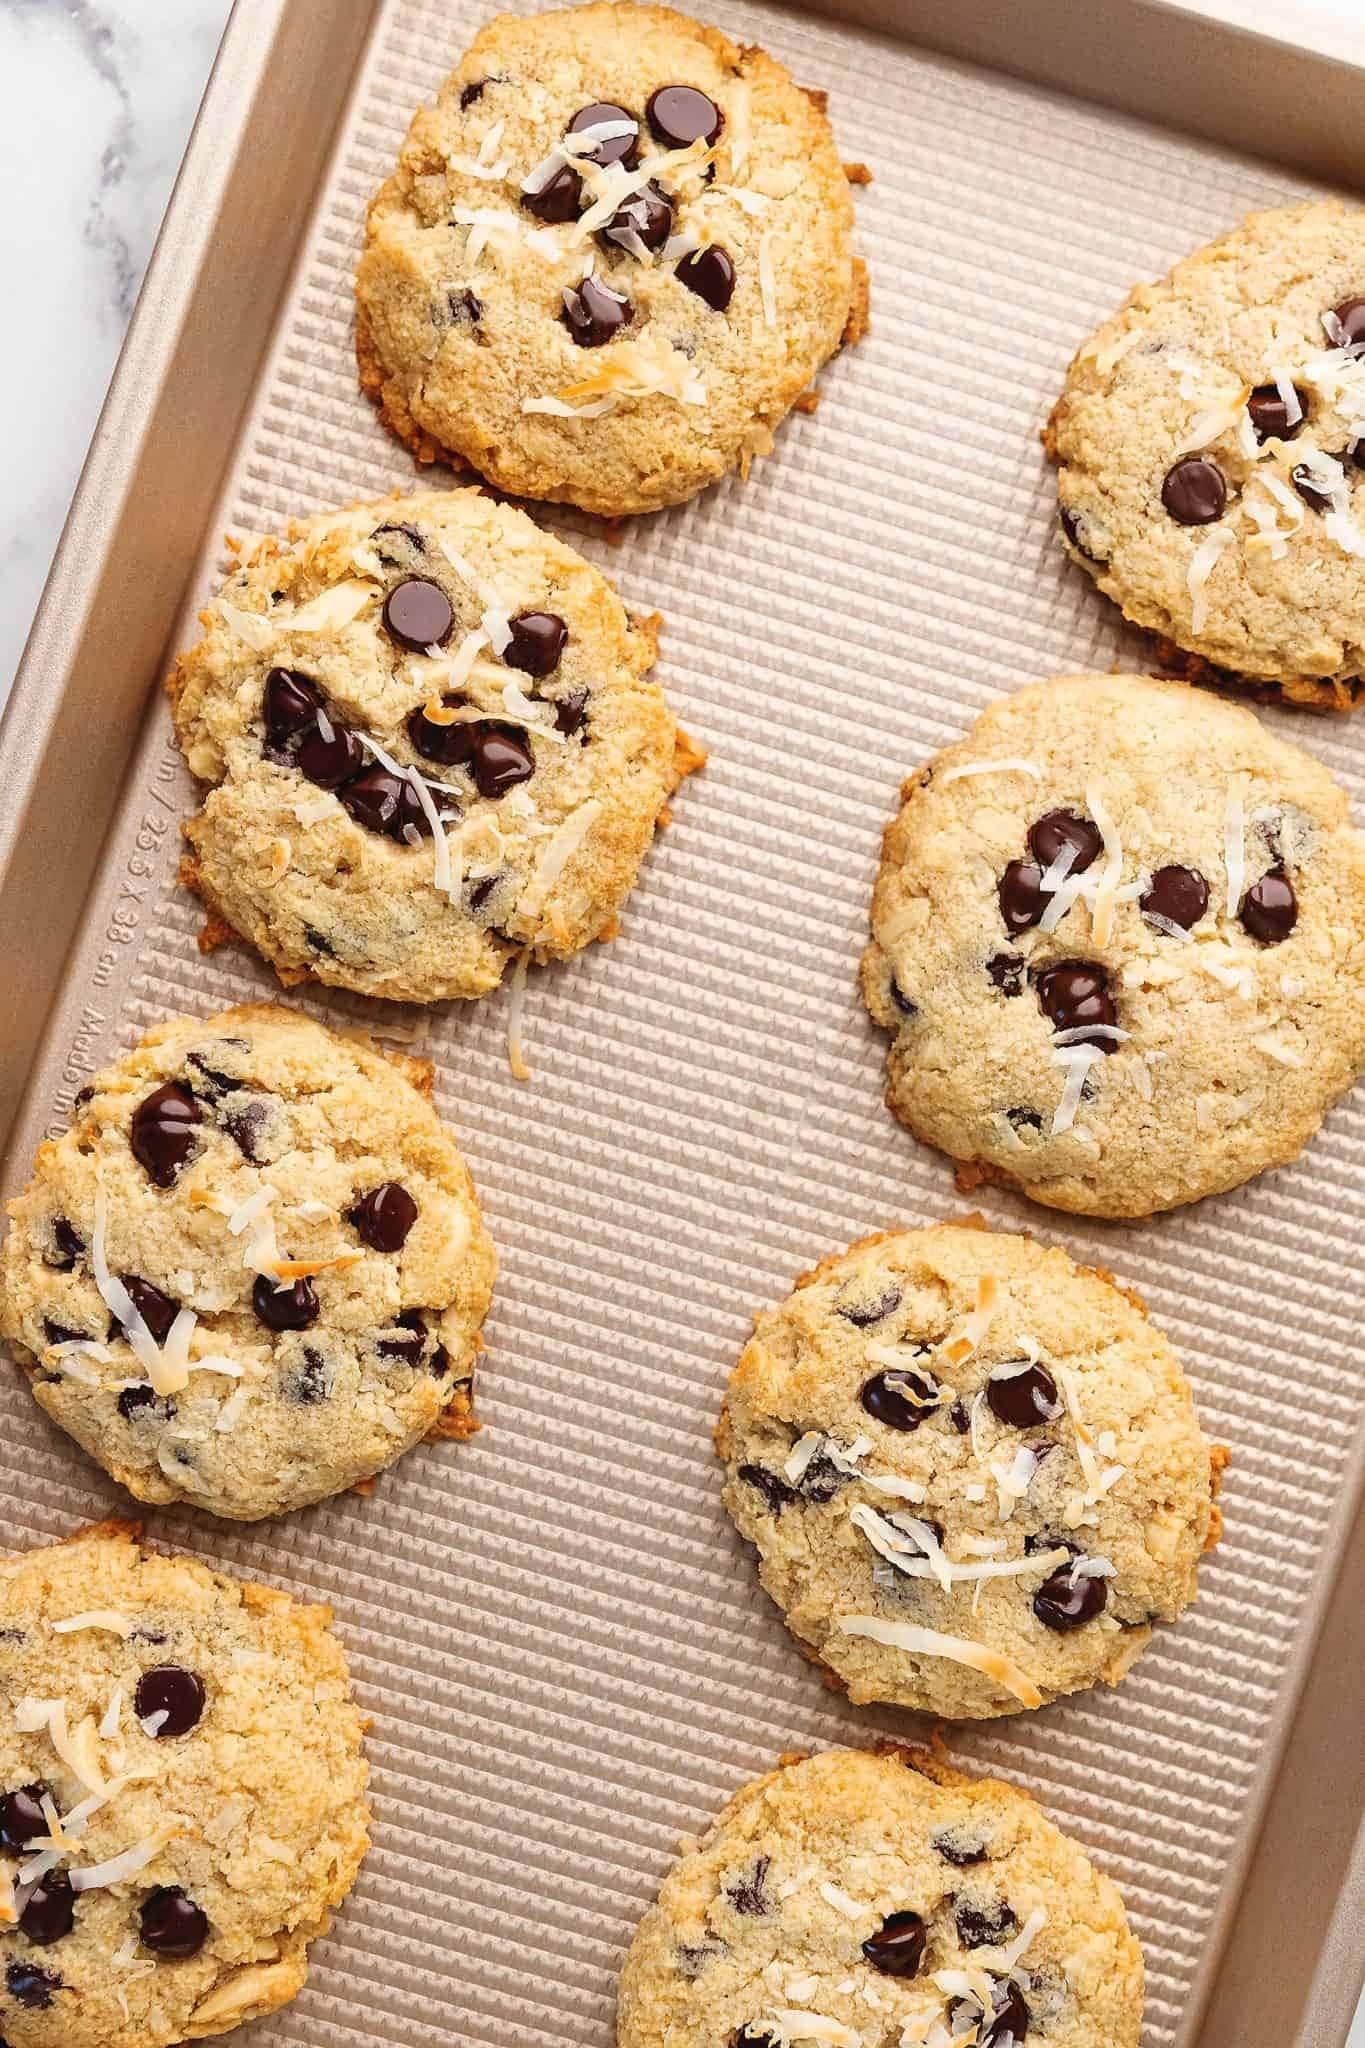 Chocolate chip cookies topped with shredded almonds on a sheet pan.